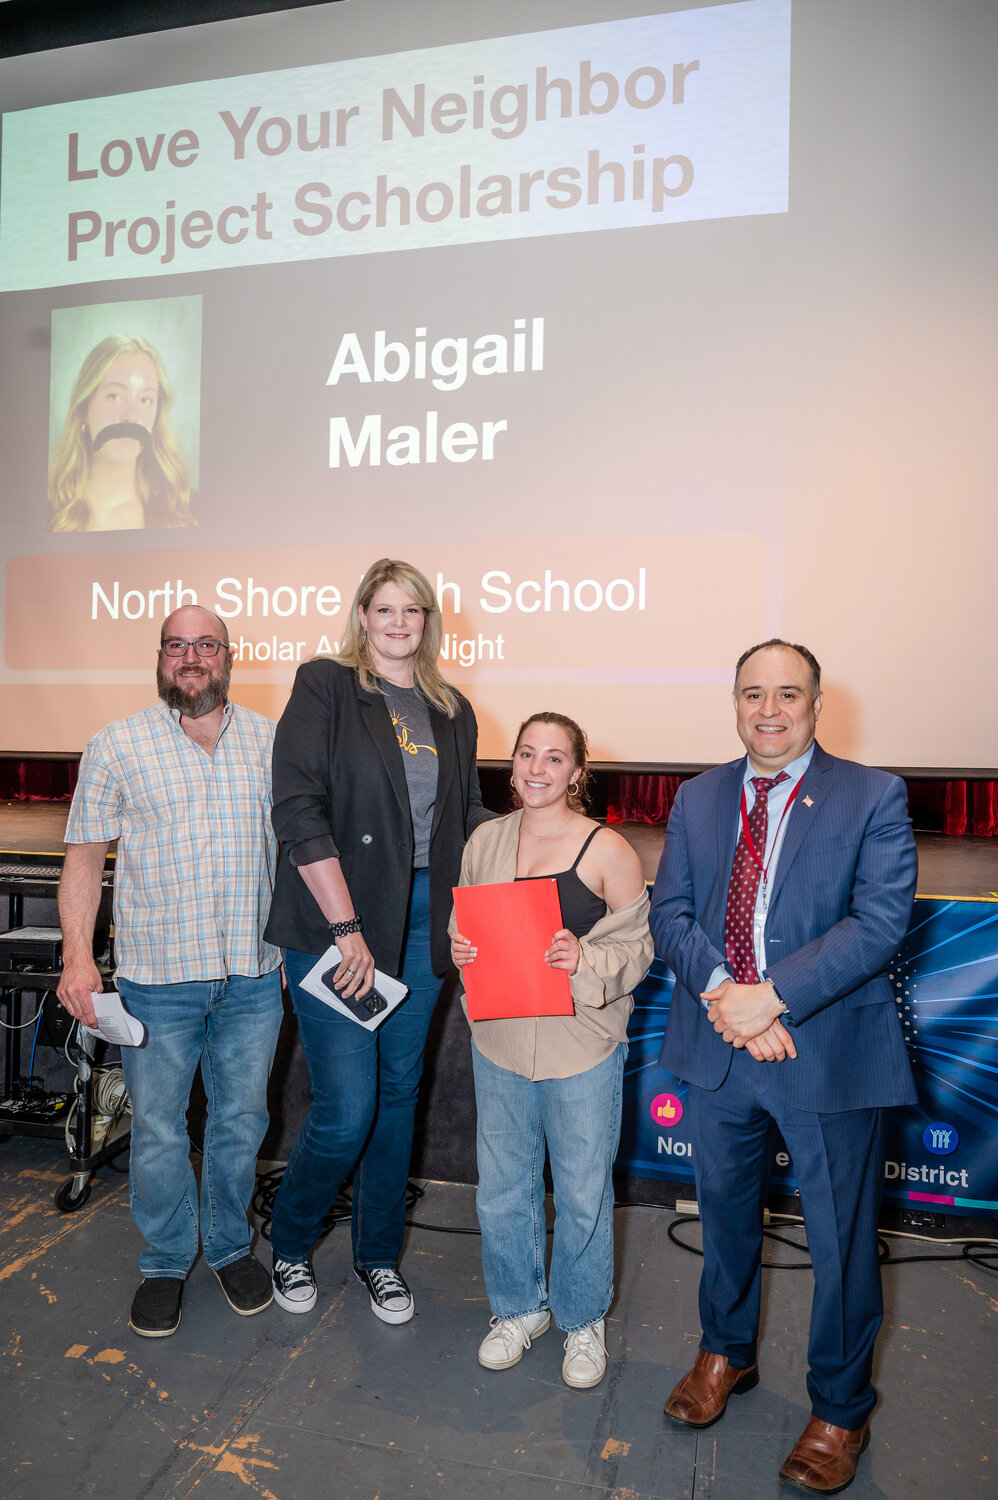 Abigail Maler, second from right, of North Shore High School, was given a Love Your Neighbor Project Scholarship by Sean Llewellyn, left, the project’s logistics neighbor, Jennifer DeSane, their strategic neighbor, and Eric Contreras, the high school principal.